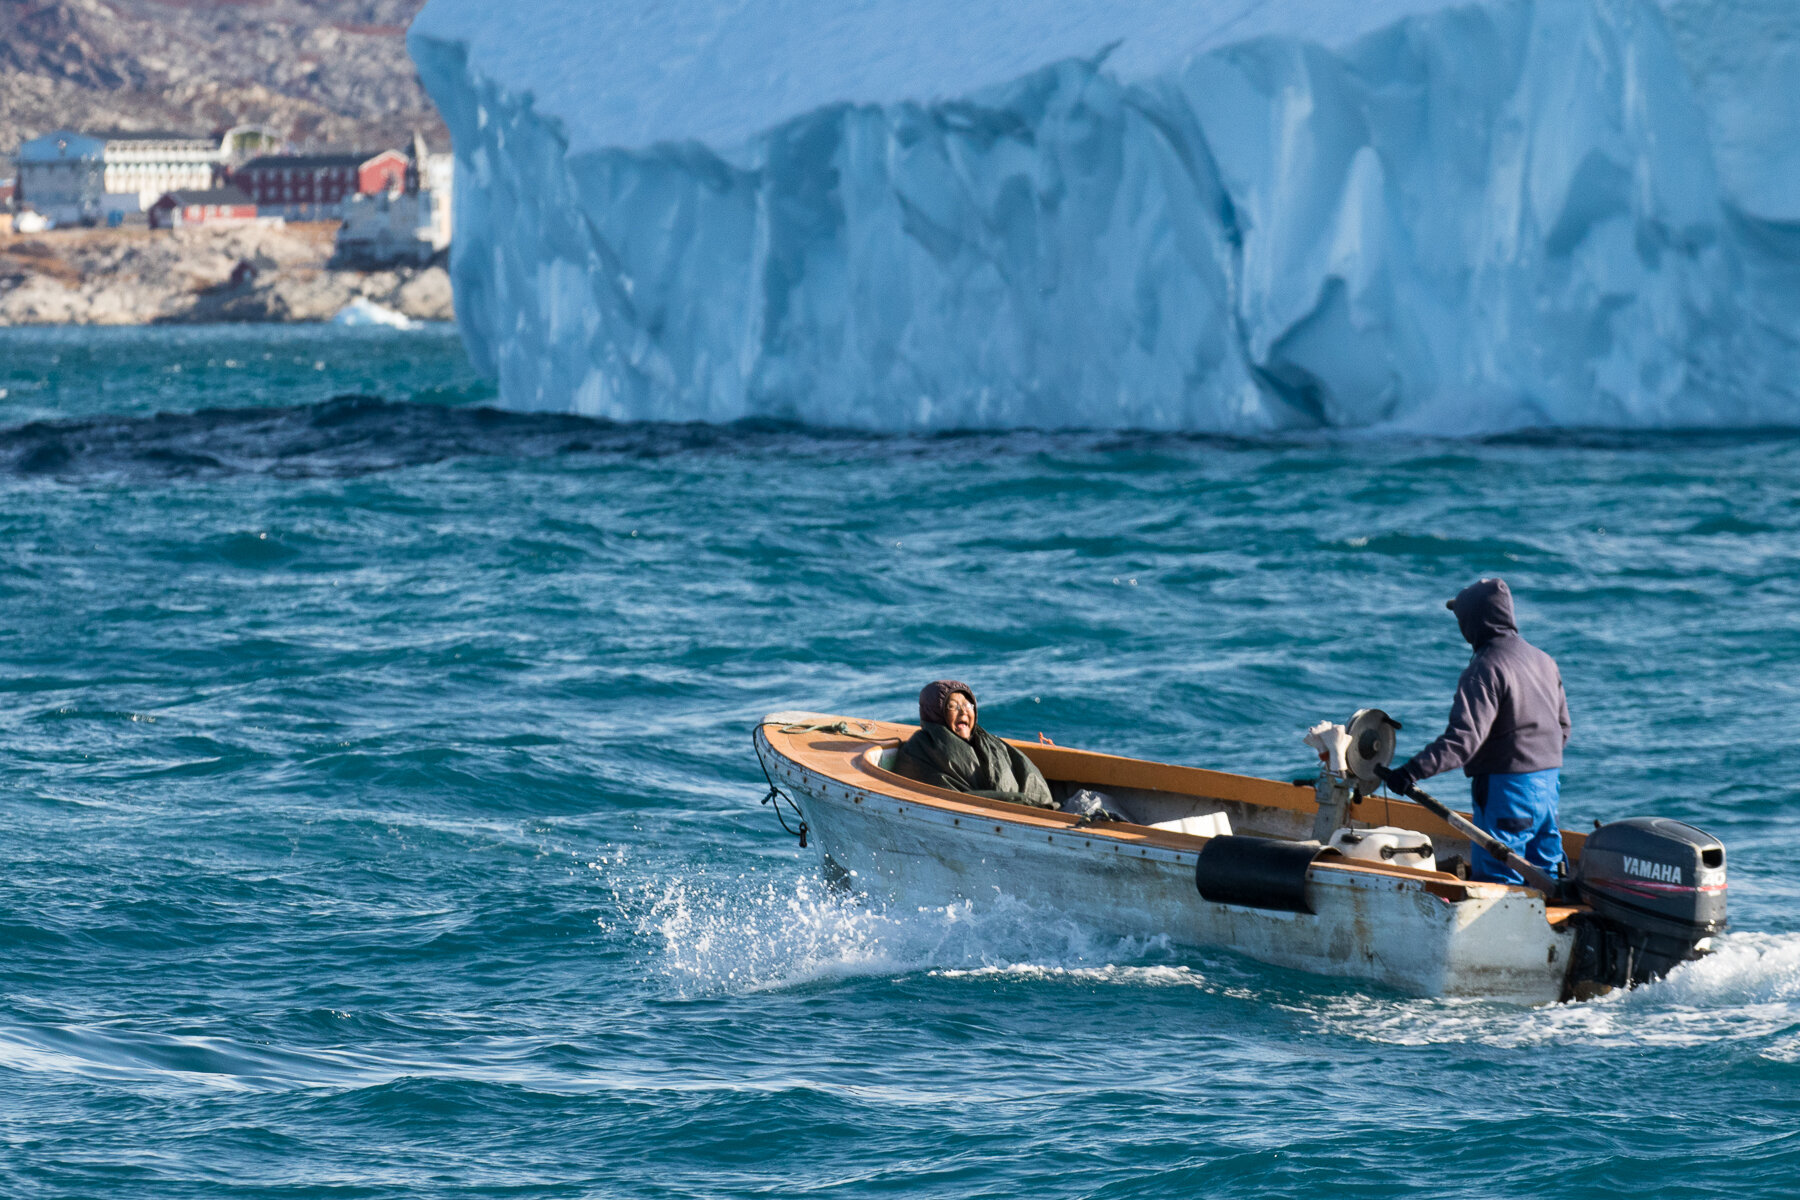  Greenland - Ilulissat- A woman laughing with pain and joy as the boat bounced relentlessly 